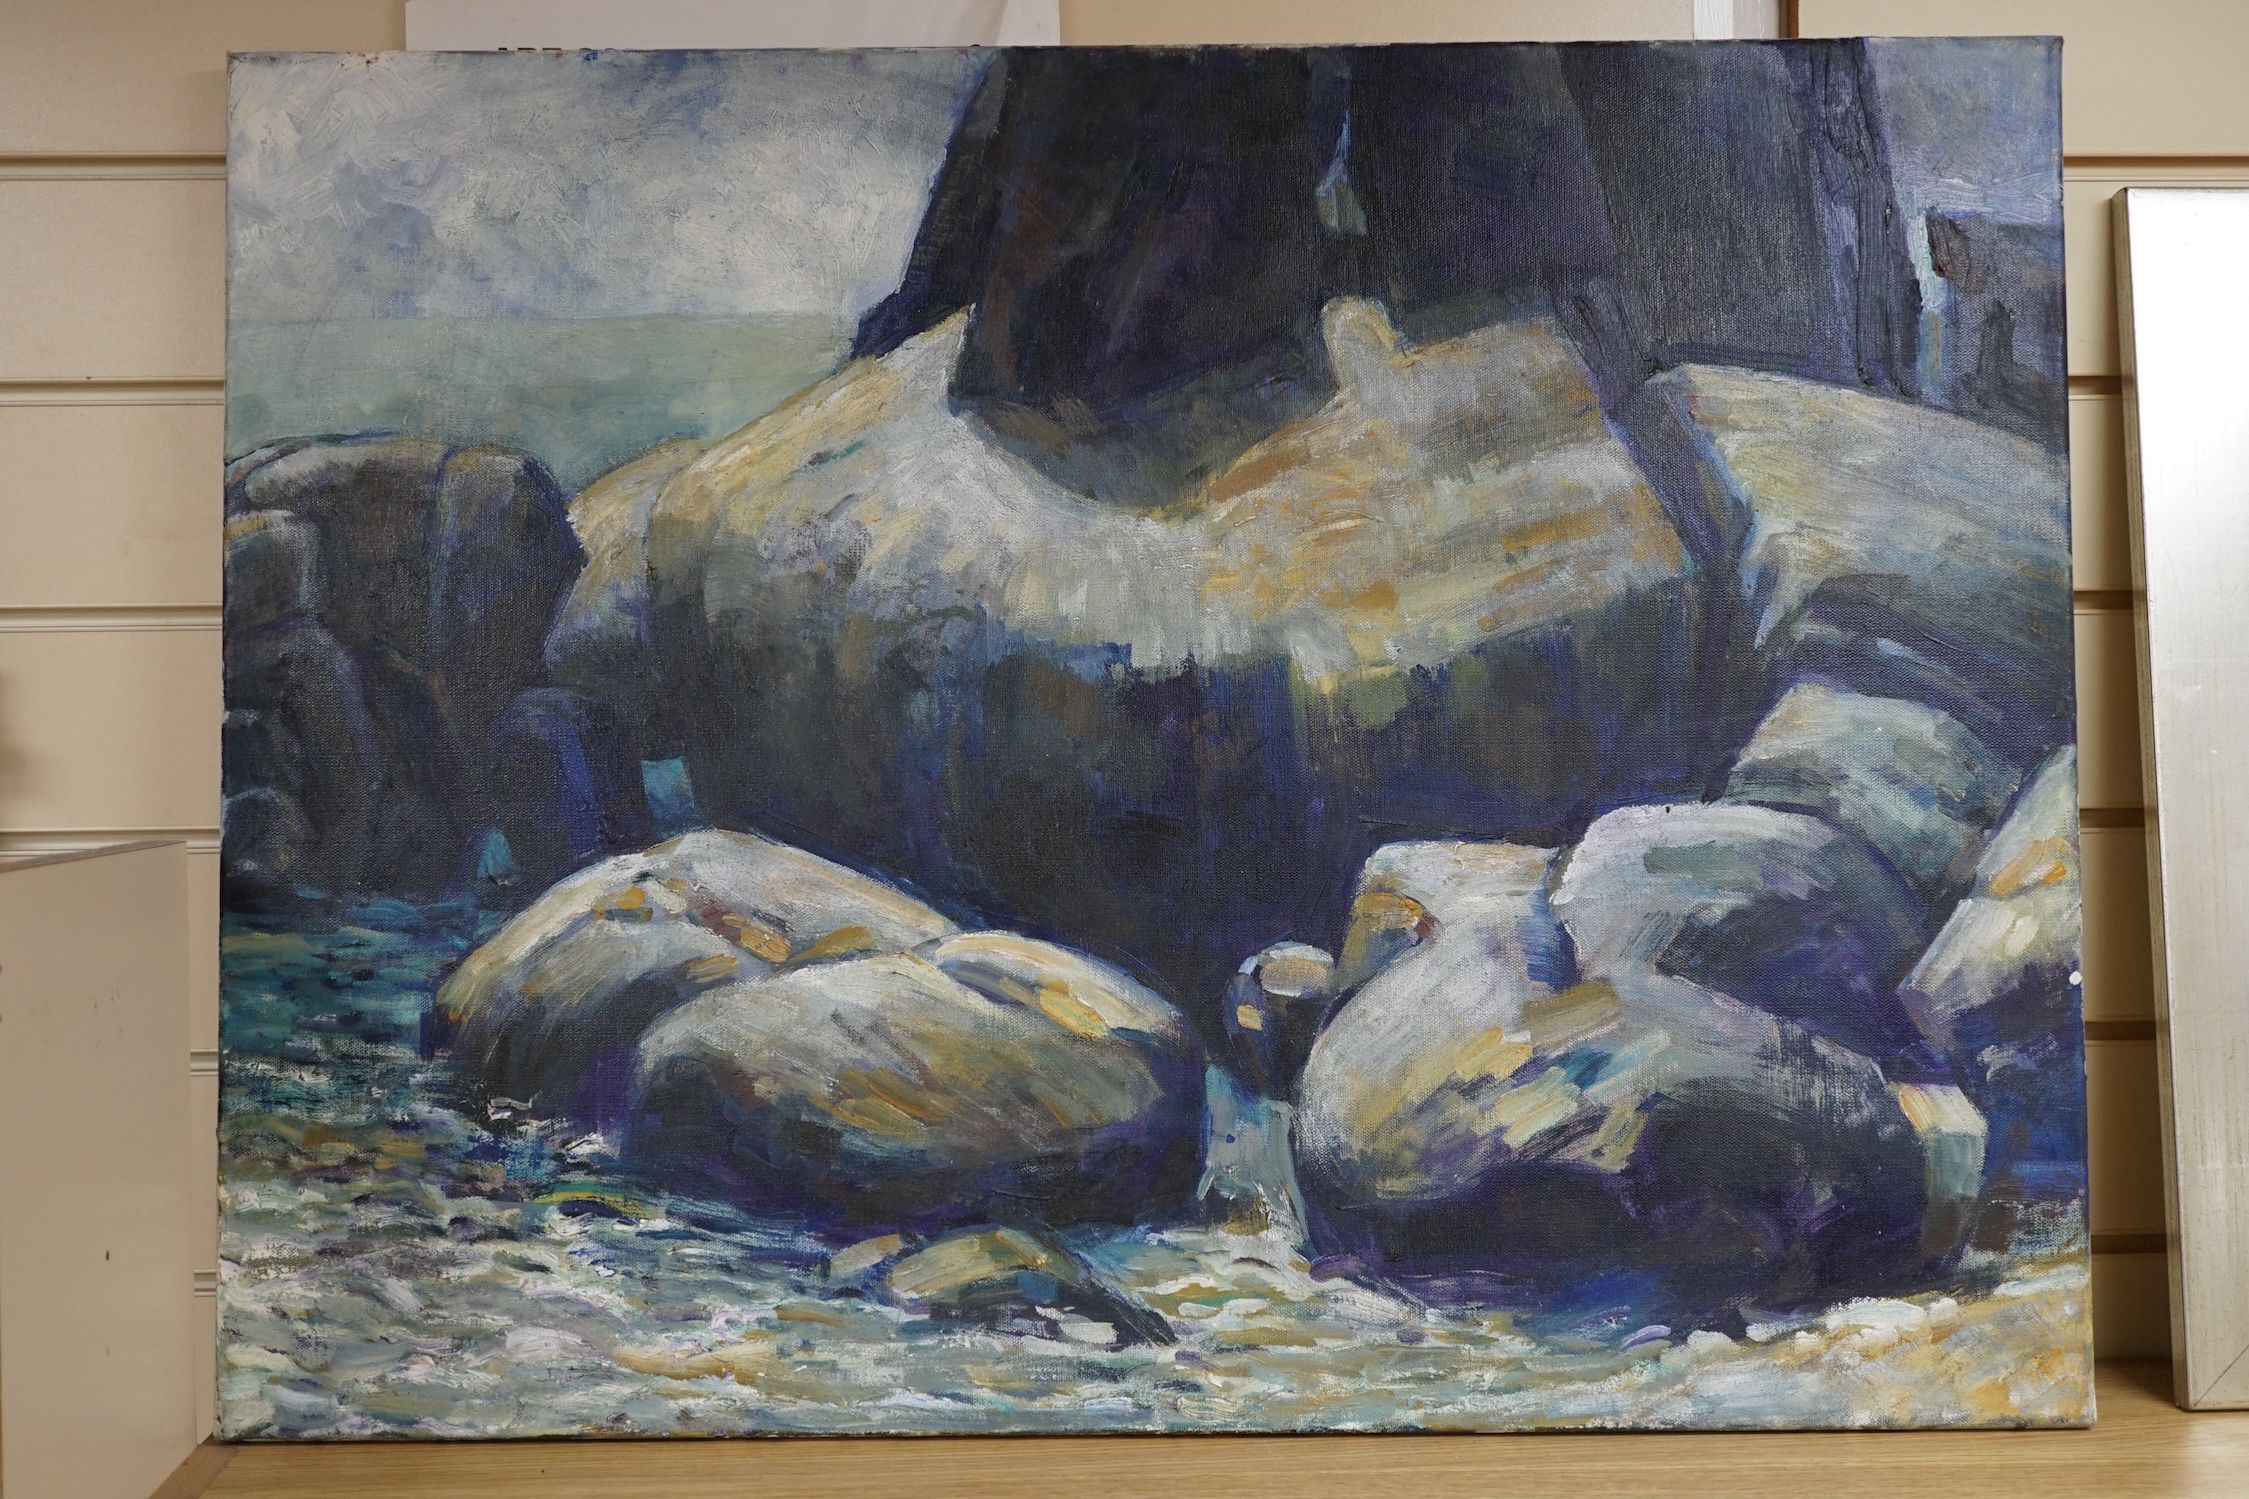 John Speirs, oil on canvas, Rocky coastal view, signed and dated ‘09 verso, 60 x 80cm, unframed. Condition - good